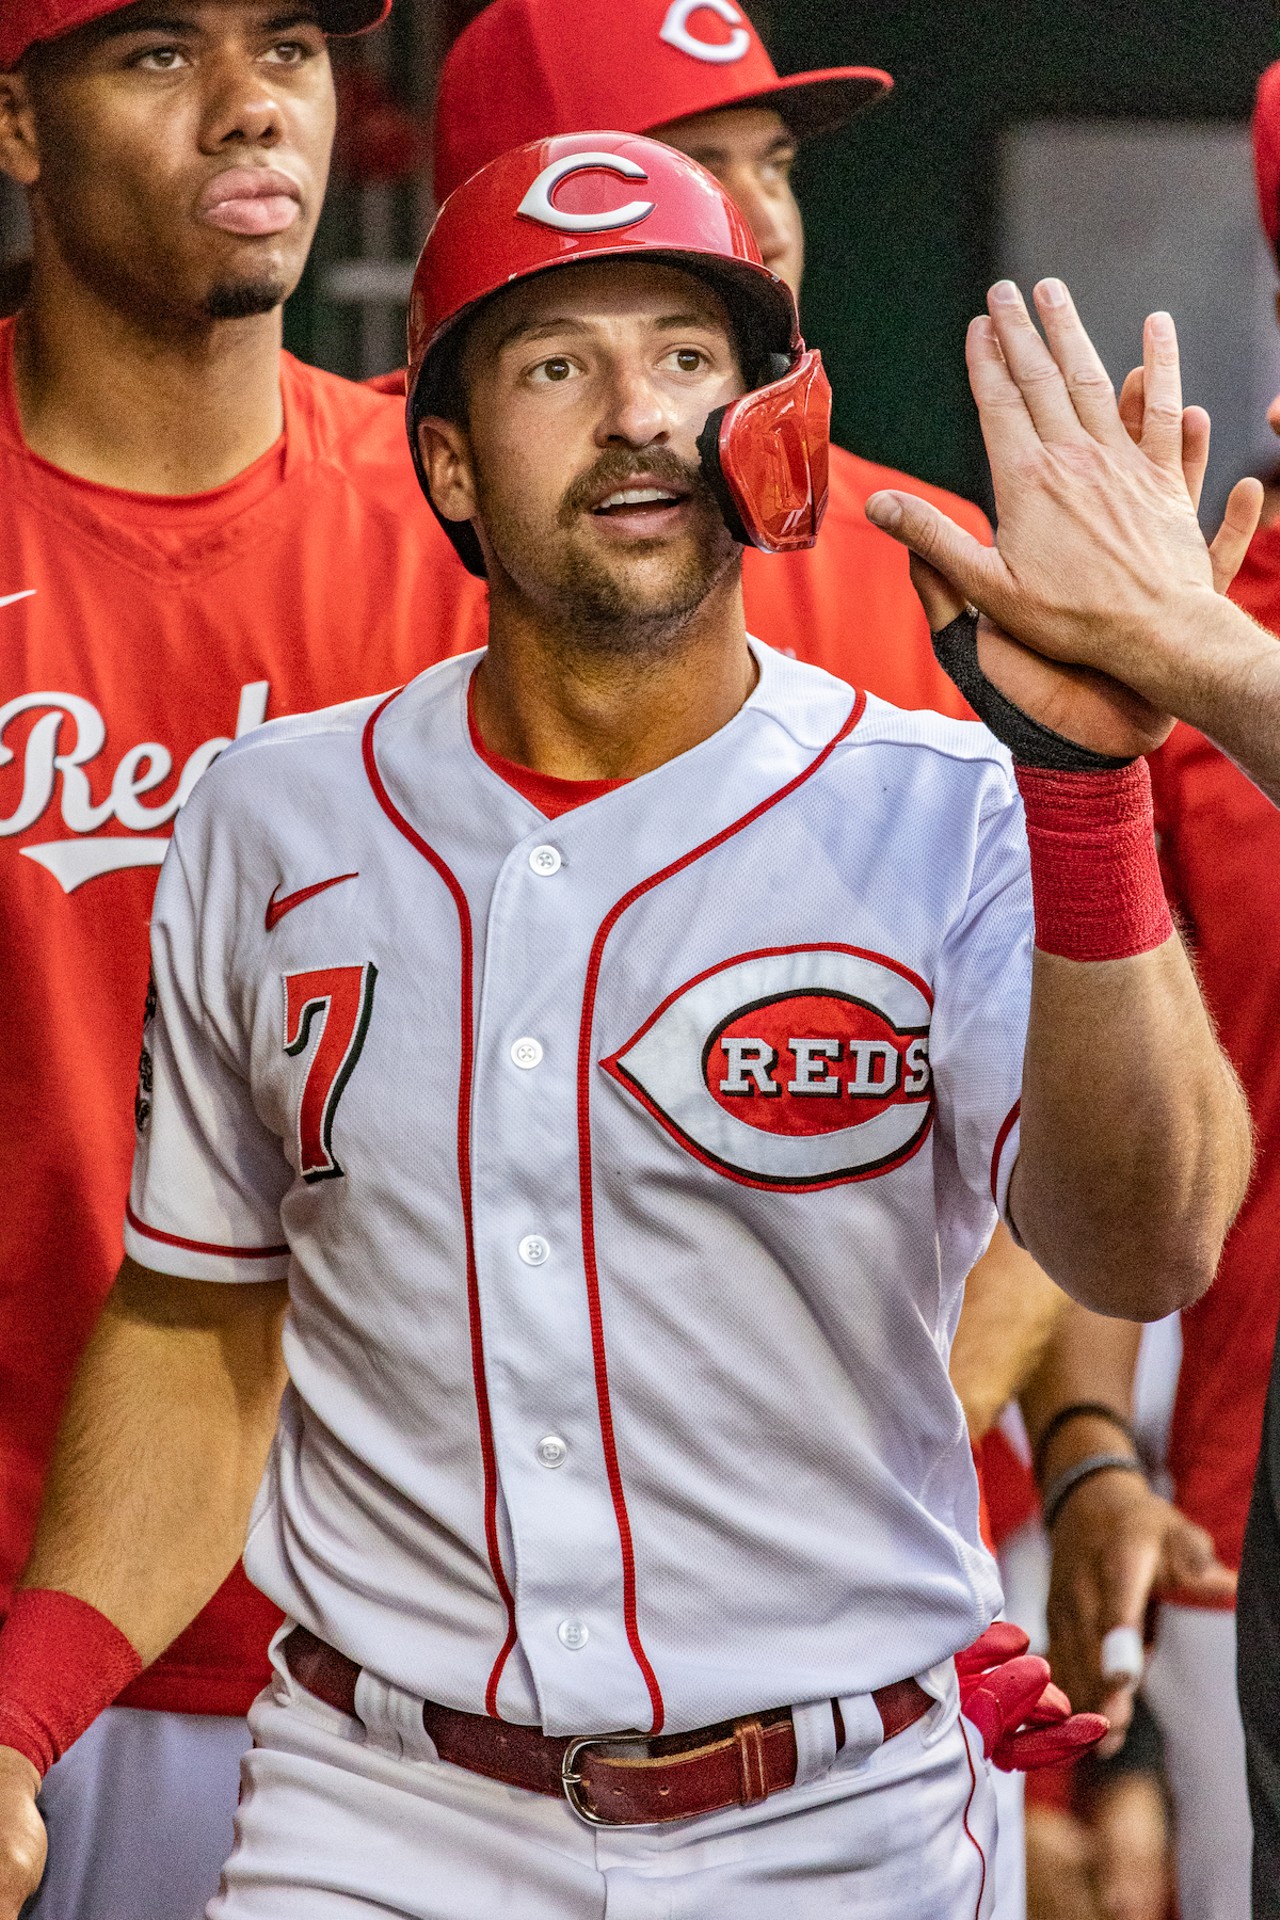 Infielder Spencer Steer during the Cincinnati Reds game against the St. Louis Cardinals on May 23, 2023.